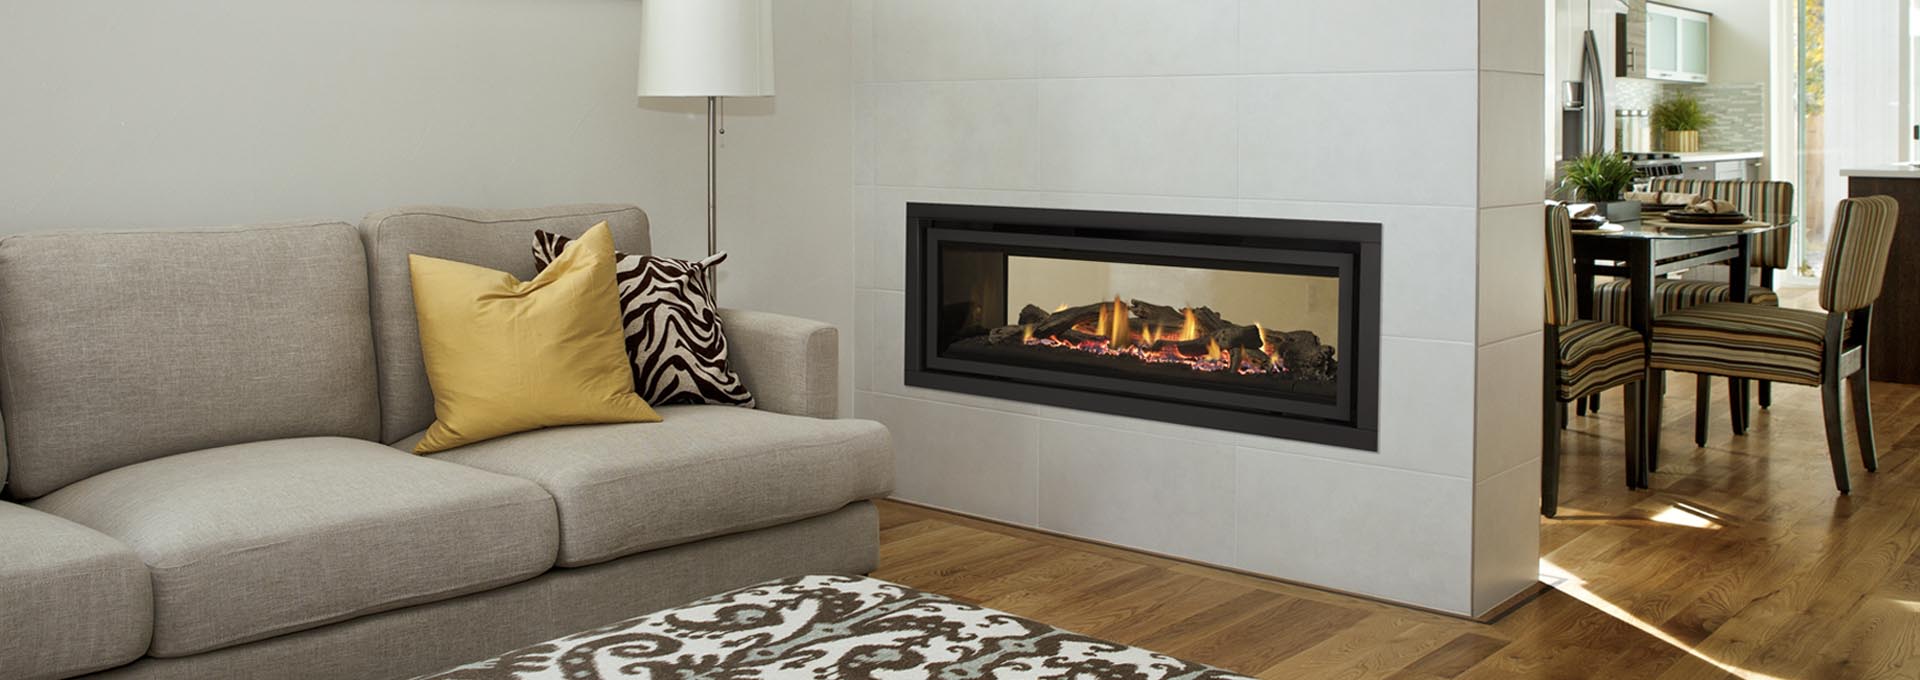 Top tips for servicing your fireplace this summer 